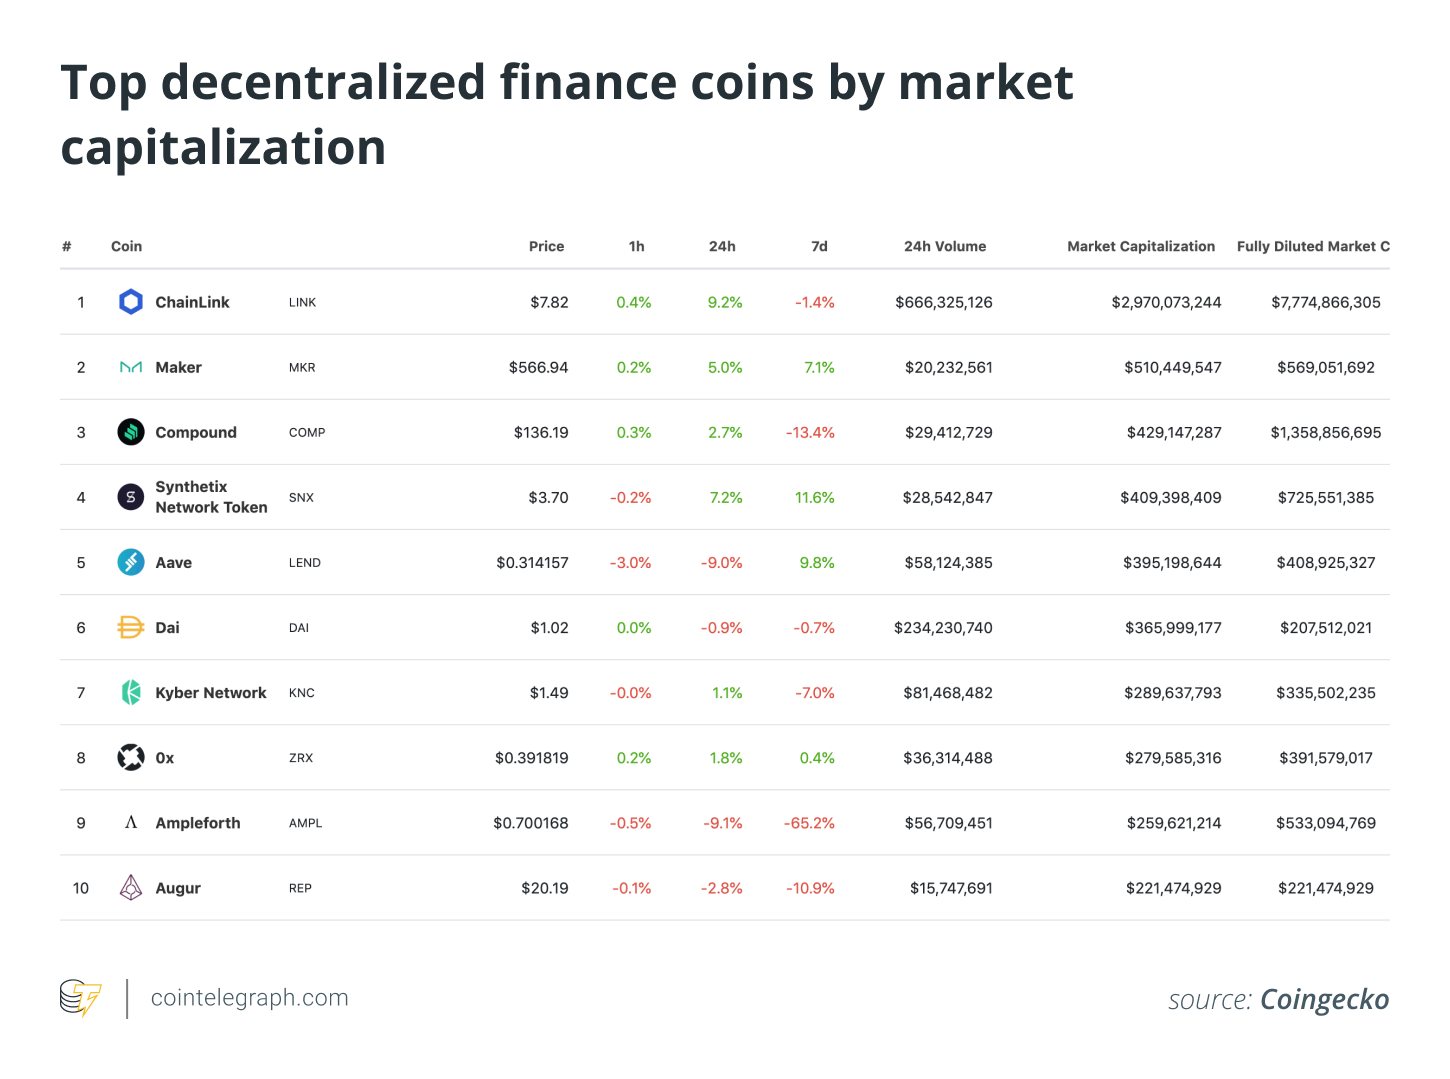 Top decentralized finance coins by market capitalization